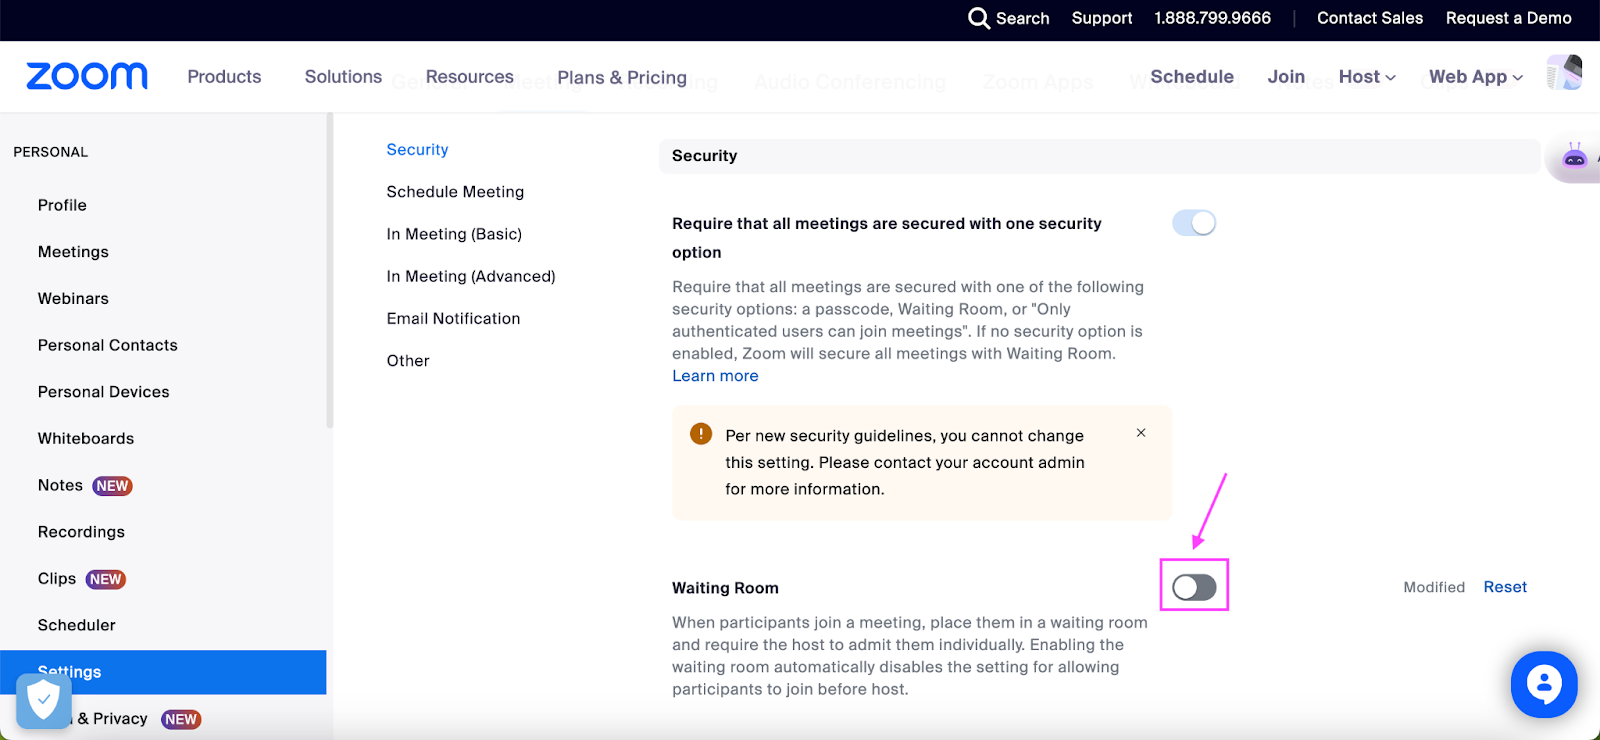 Zoom waiting room - How to enable Zoom Waiting Room for all meetings